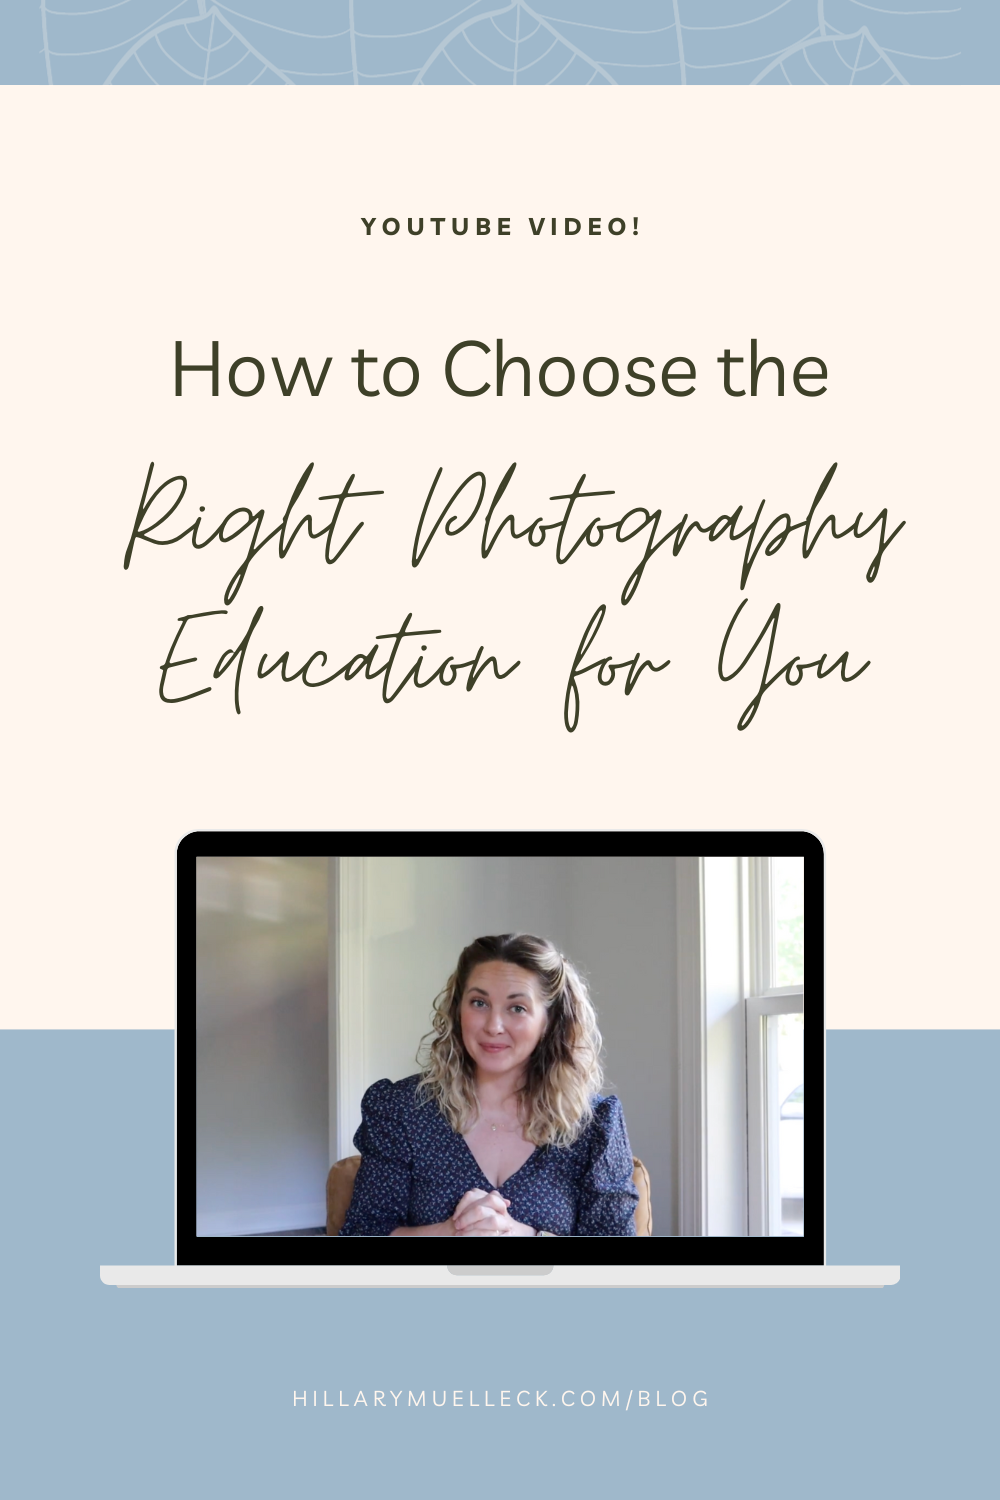 Photographer Hillary Muelleck shares how to choose the right photography education option for you to learn and meet your goals